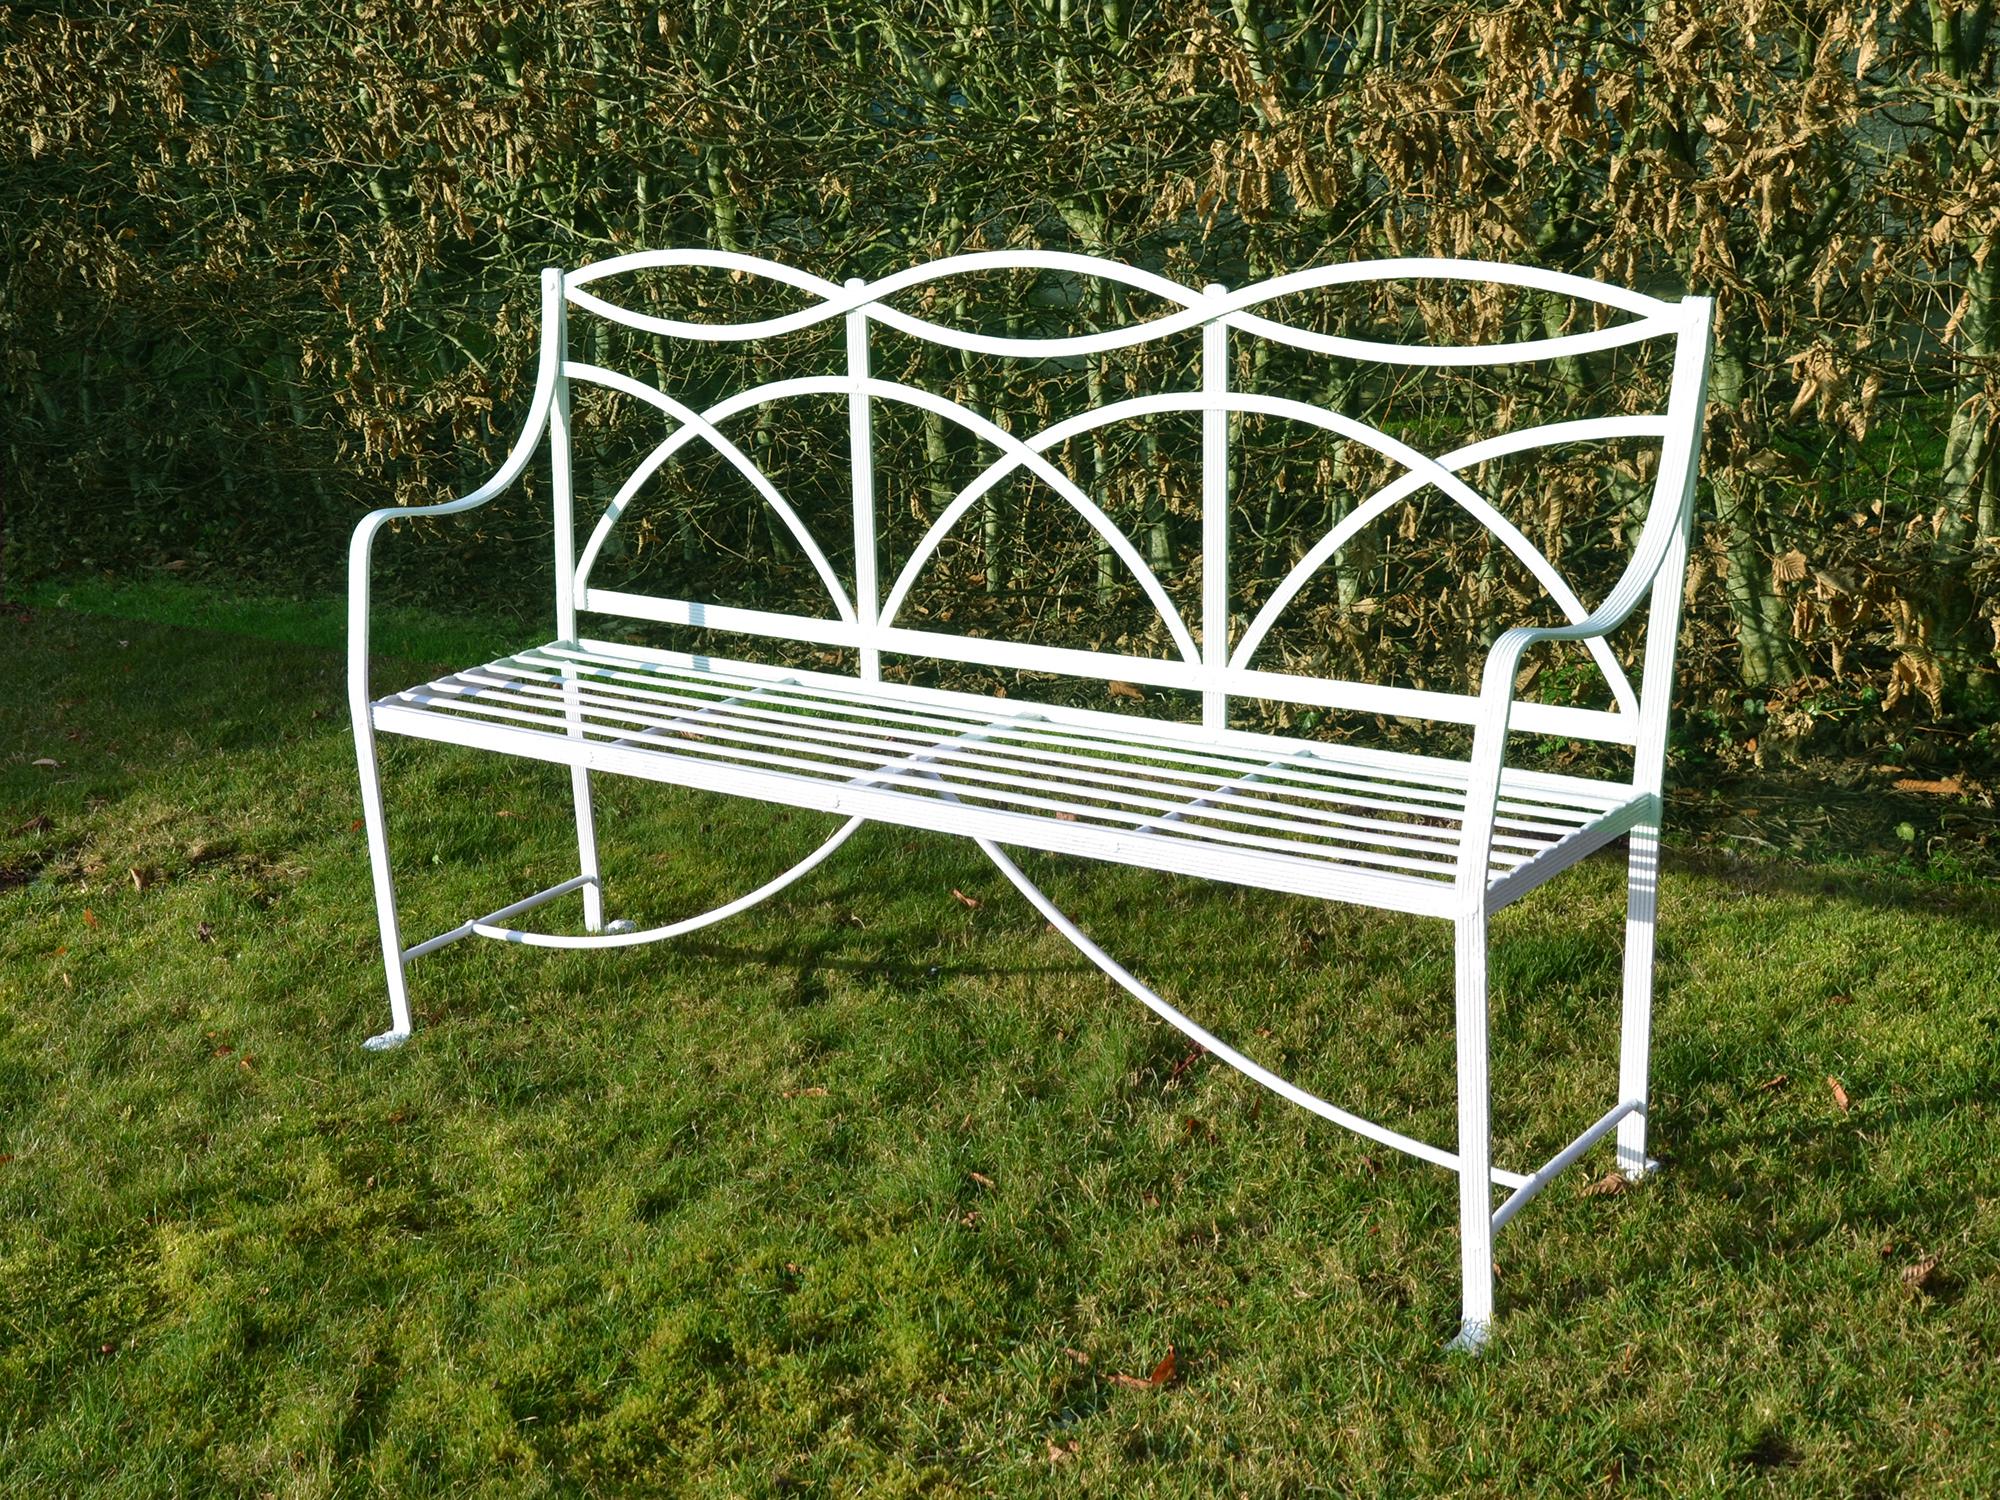 A Regency wrought iron garden seat constructed of reeded strips of iron brazed and pinned to form the classic arch back, straight slat seat with curved arm rests.